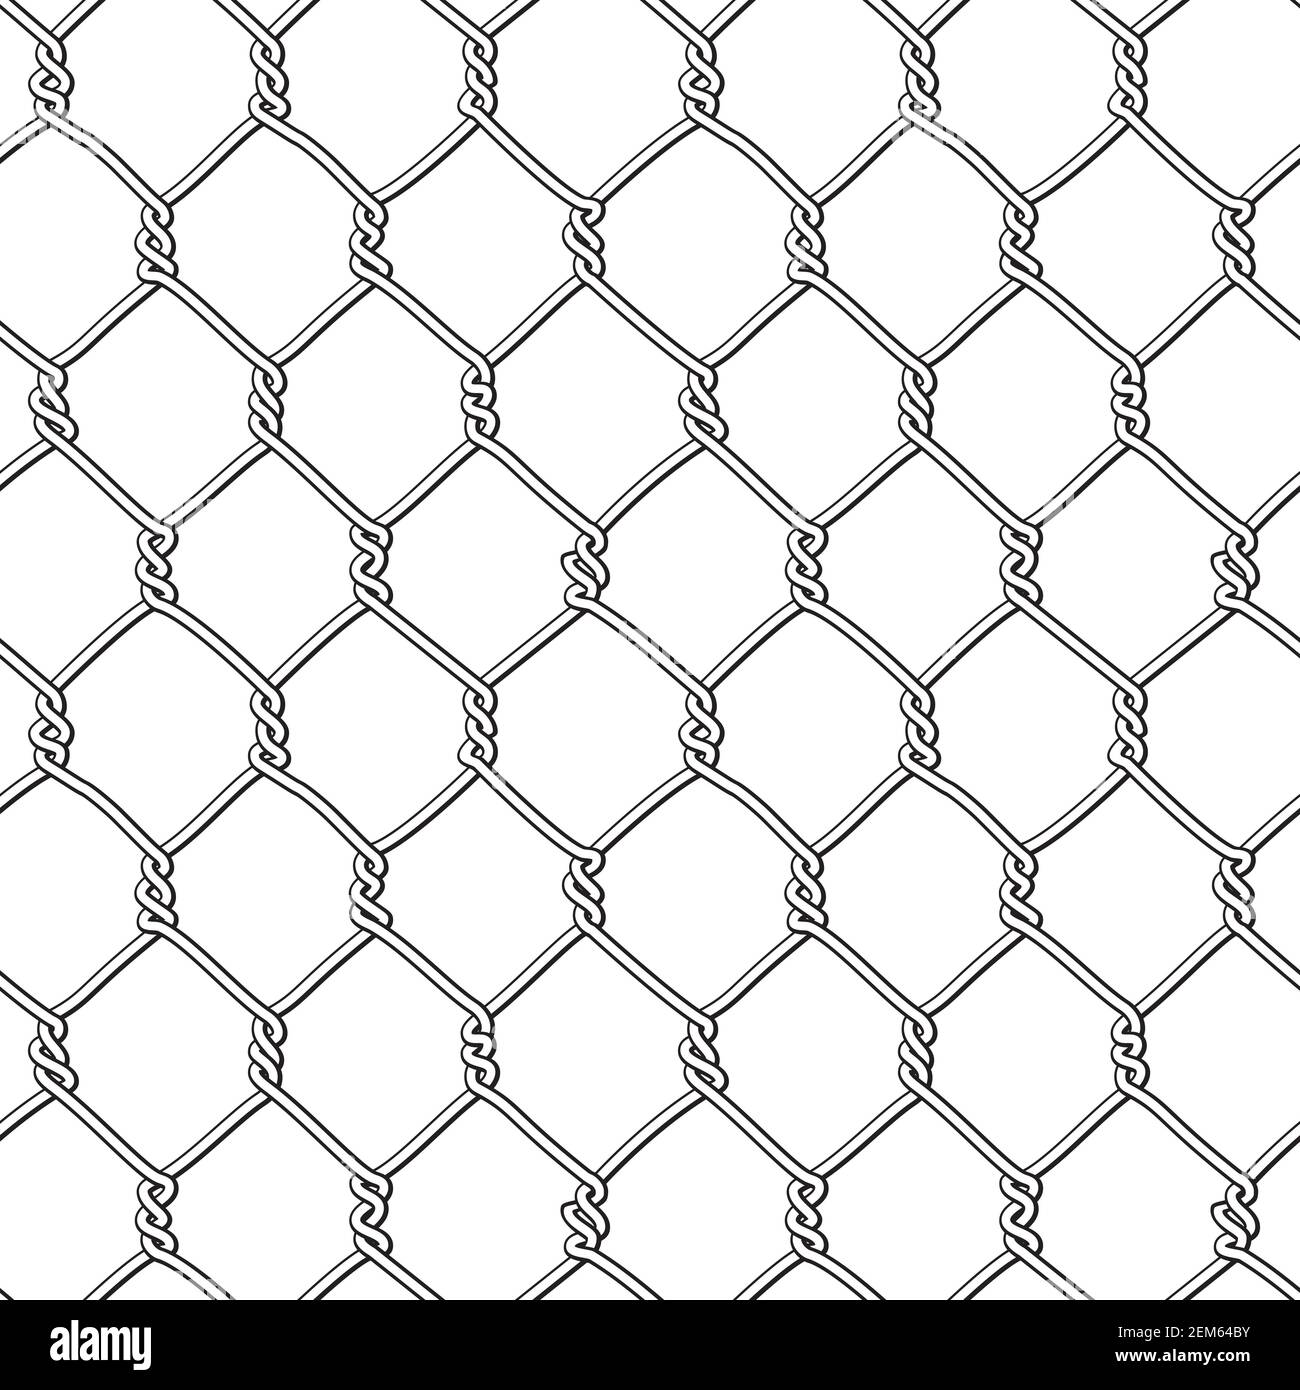 Chicken Wire SVG. Seamless Cricut Cut Files, Silhouette Files. Pattern,  Background, Black, White. PNG, DXF, Eps. Digital. -  Norway